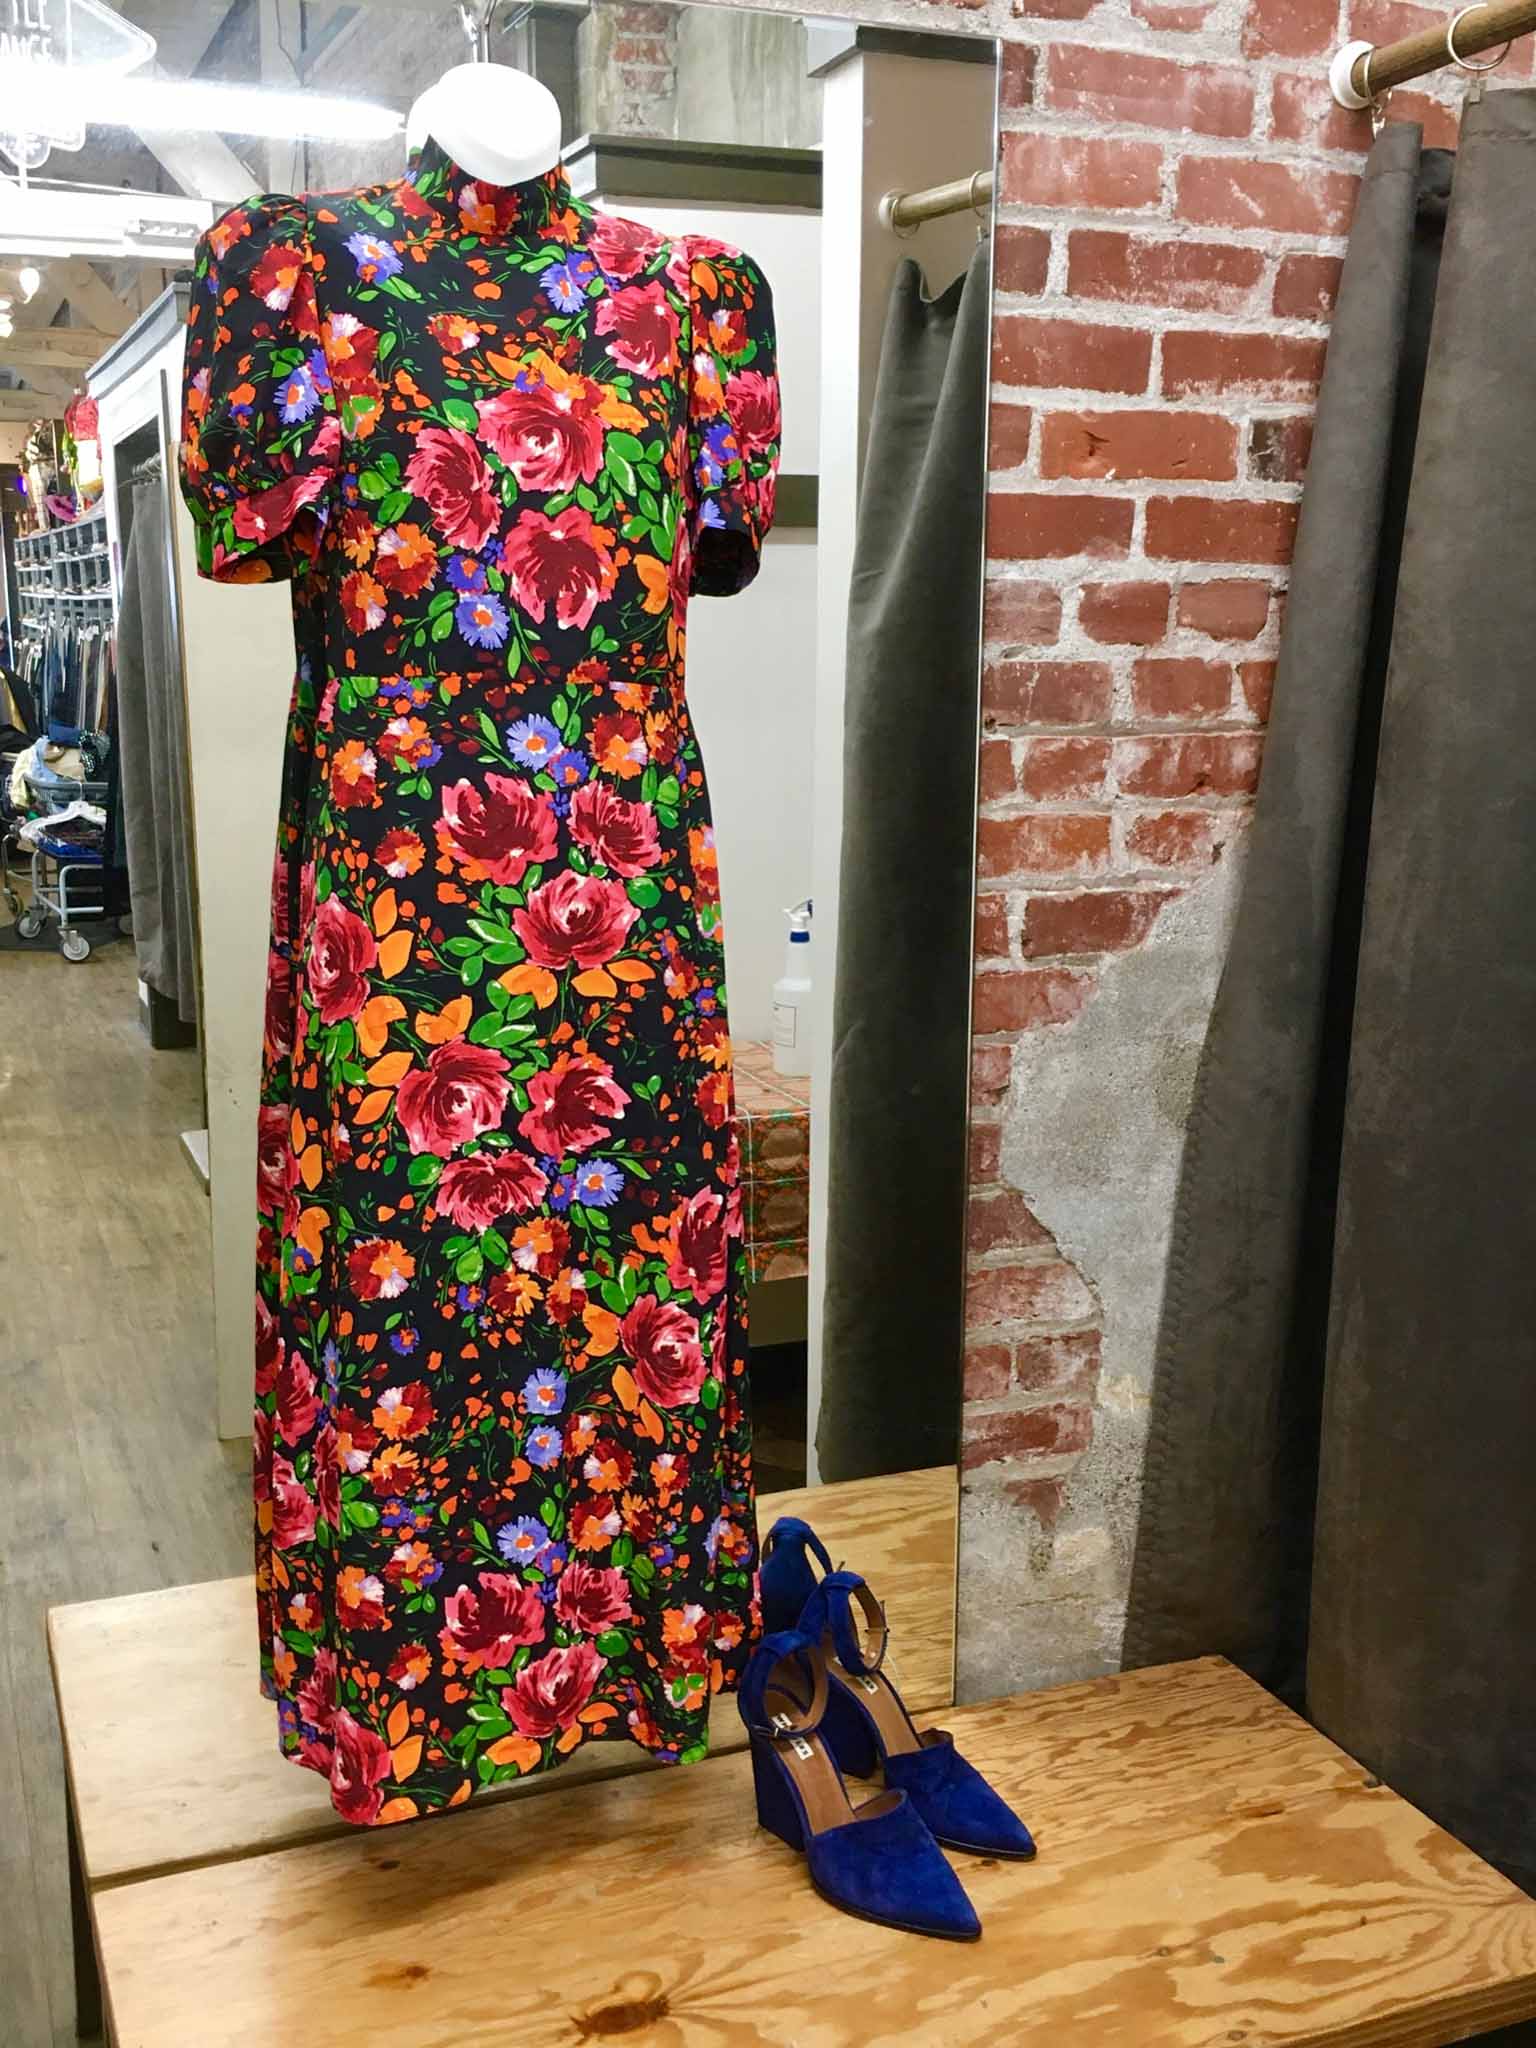 Floral midi dress and blue suede heels on mannequin hanging in front of wall-mounted mirror above wooden bench.